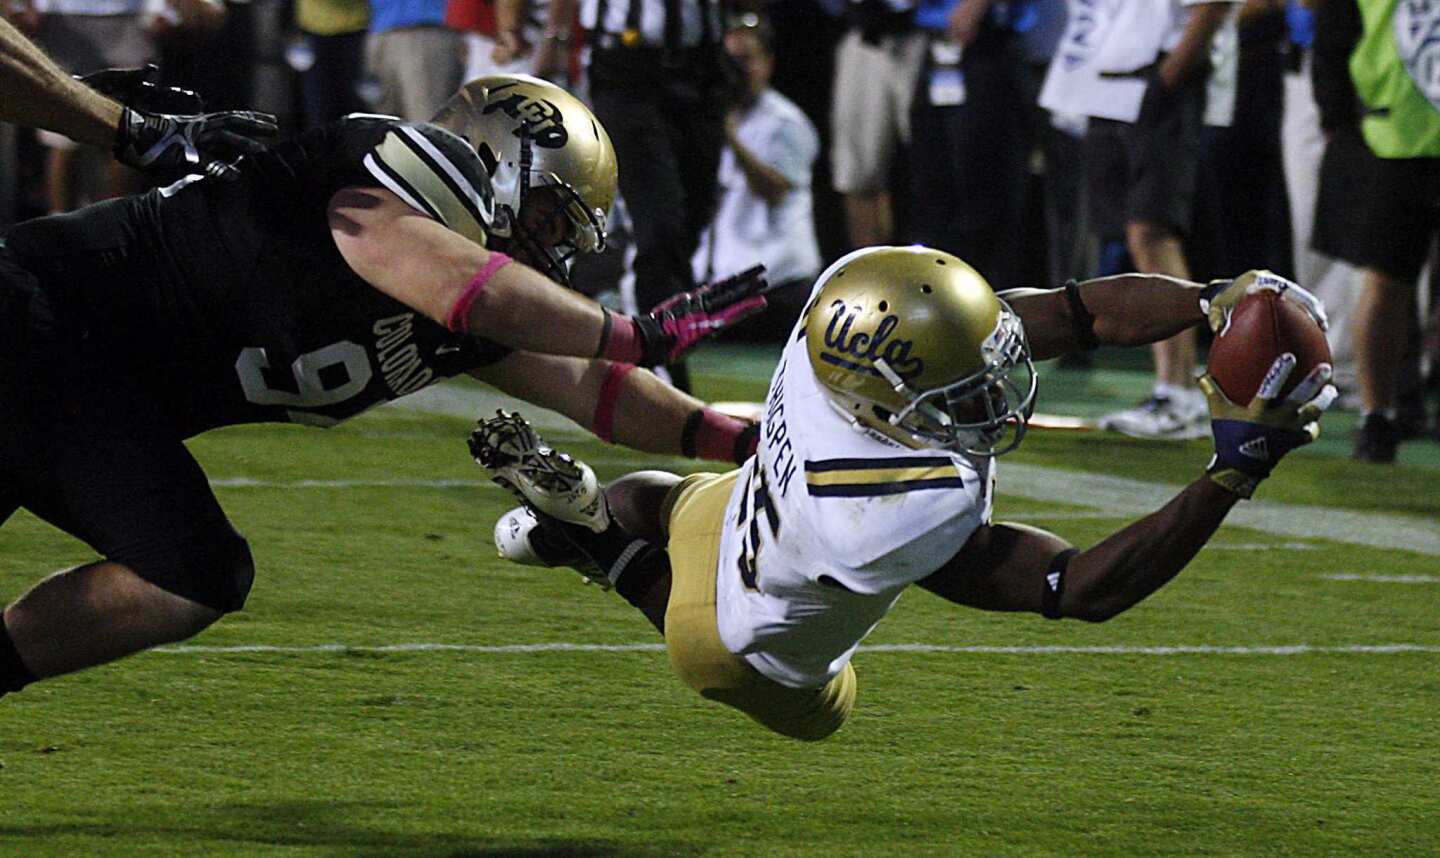 UCLA receiver Damien Thigpen dvies into the end zone past Colorado defensive lineman Tyler Henington for a touchdown in the fourth quarter Saturday. Thigpen scored on a reverse.